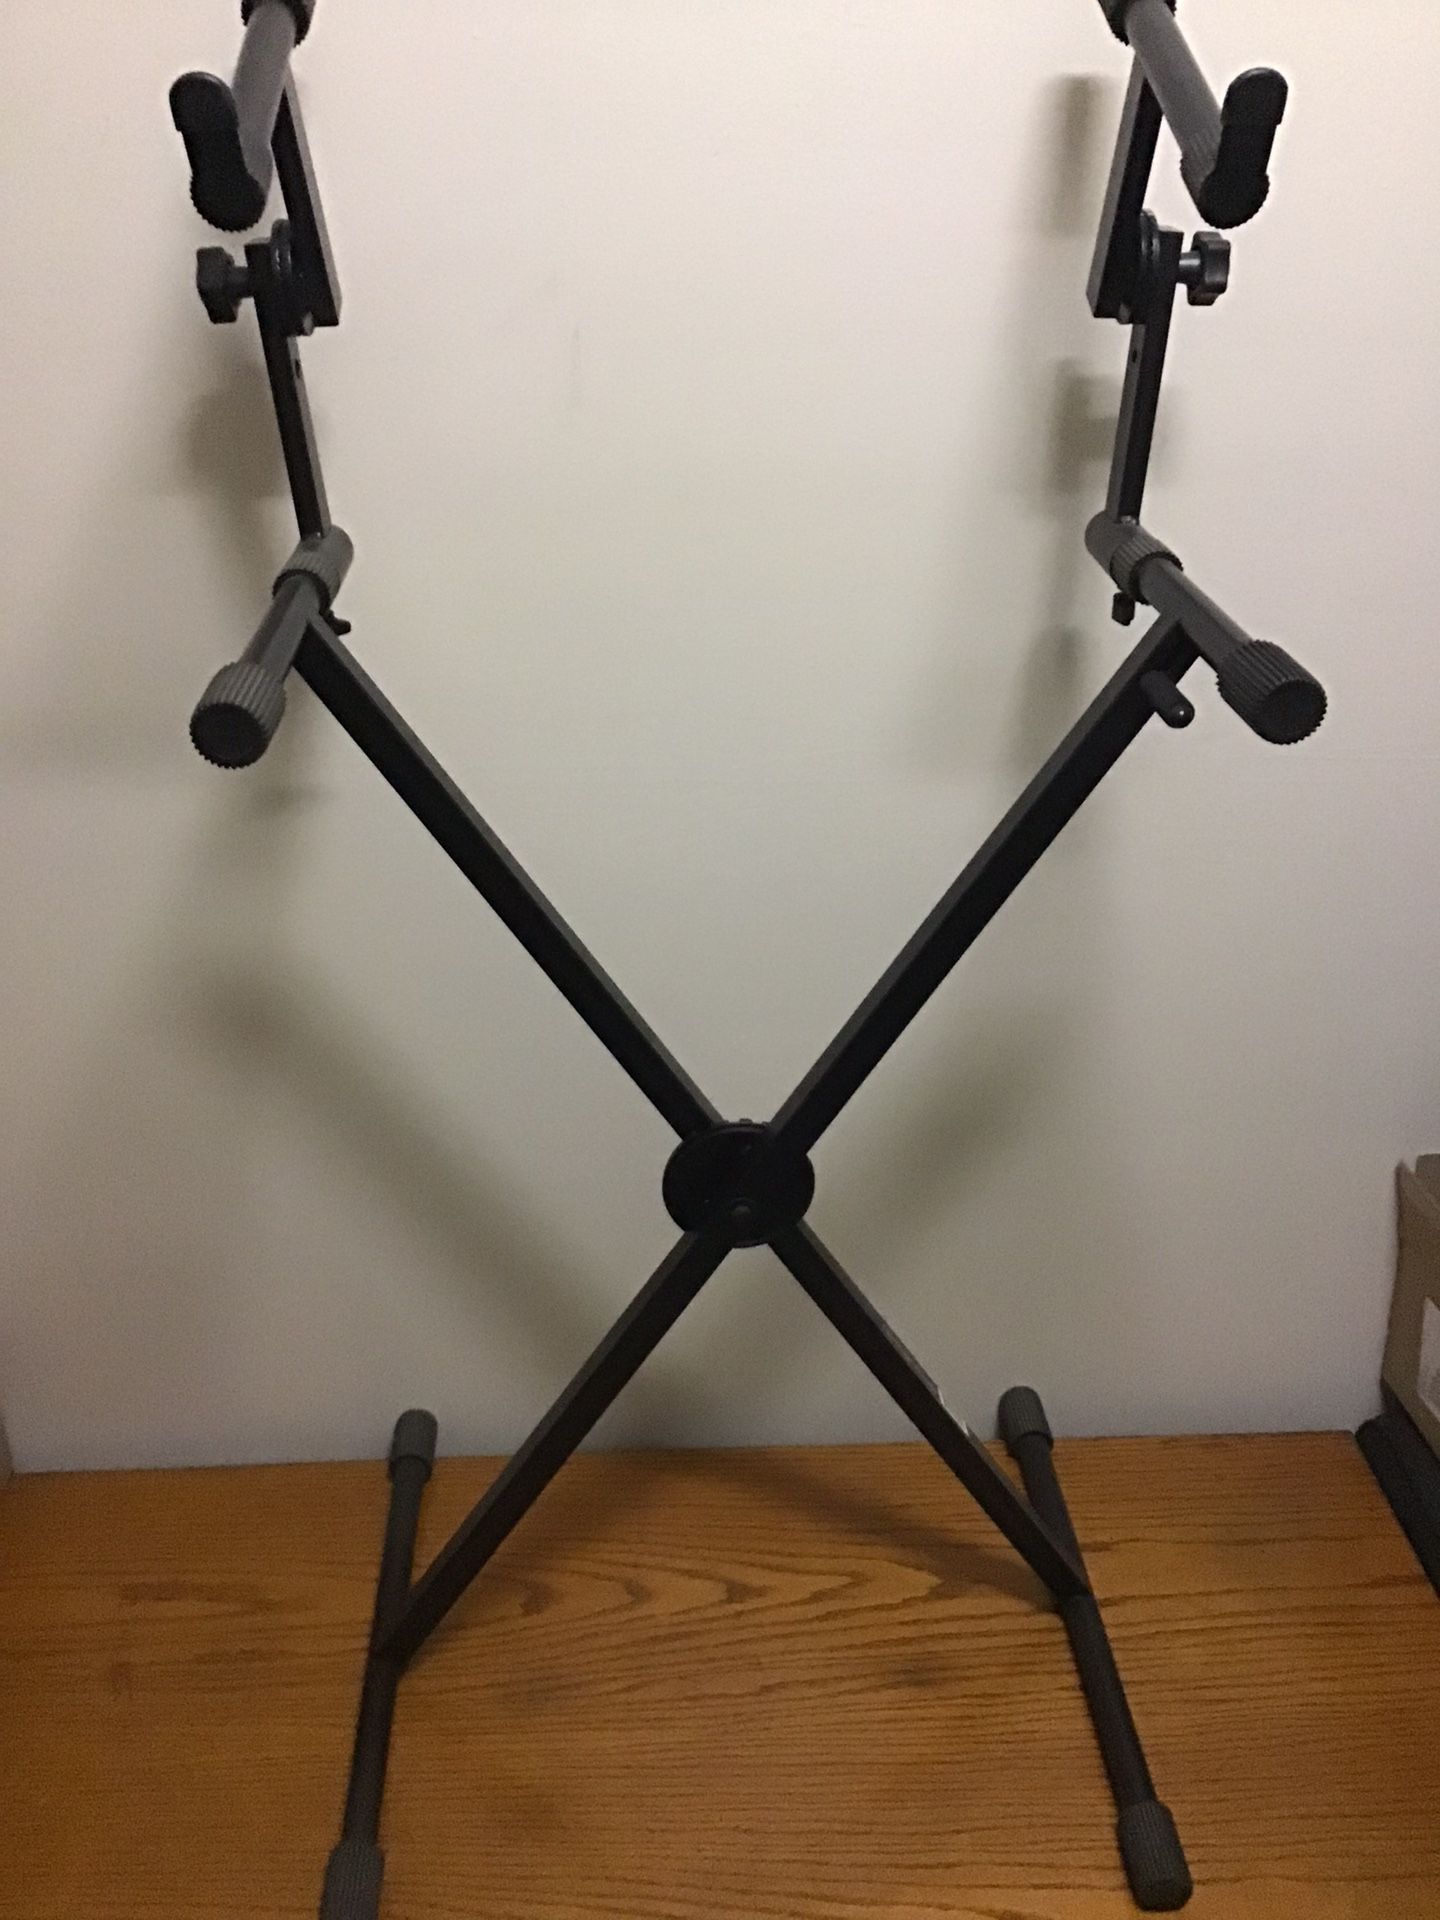 On-Stage Dual Keyboard Stand with Ergo-Lok